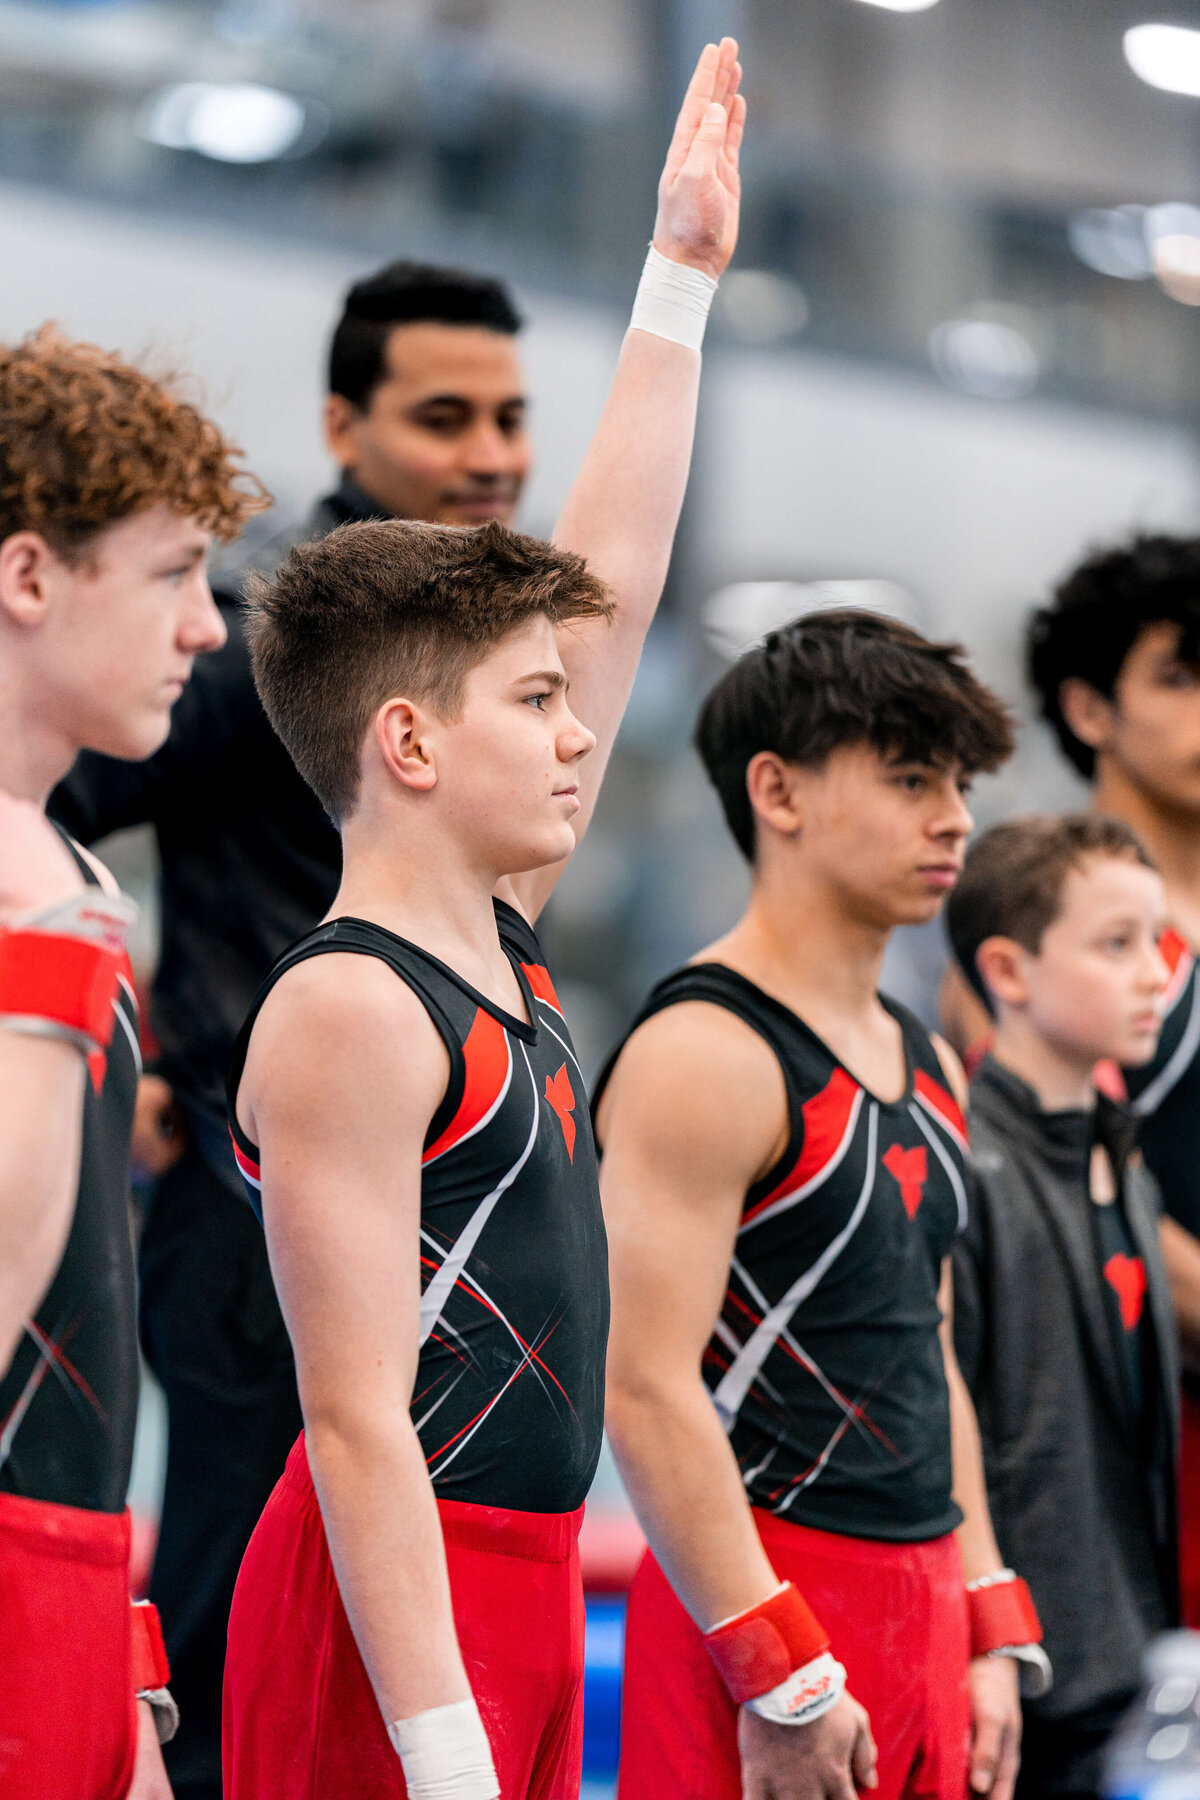 Photo by Luke O'Geil taken at the 2023 inaugural Grizzly Classic men's artistic gymnastics competitionA9_00664